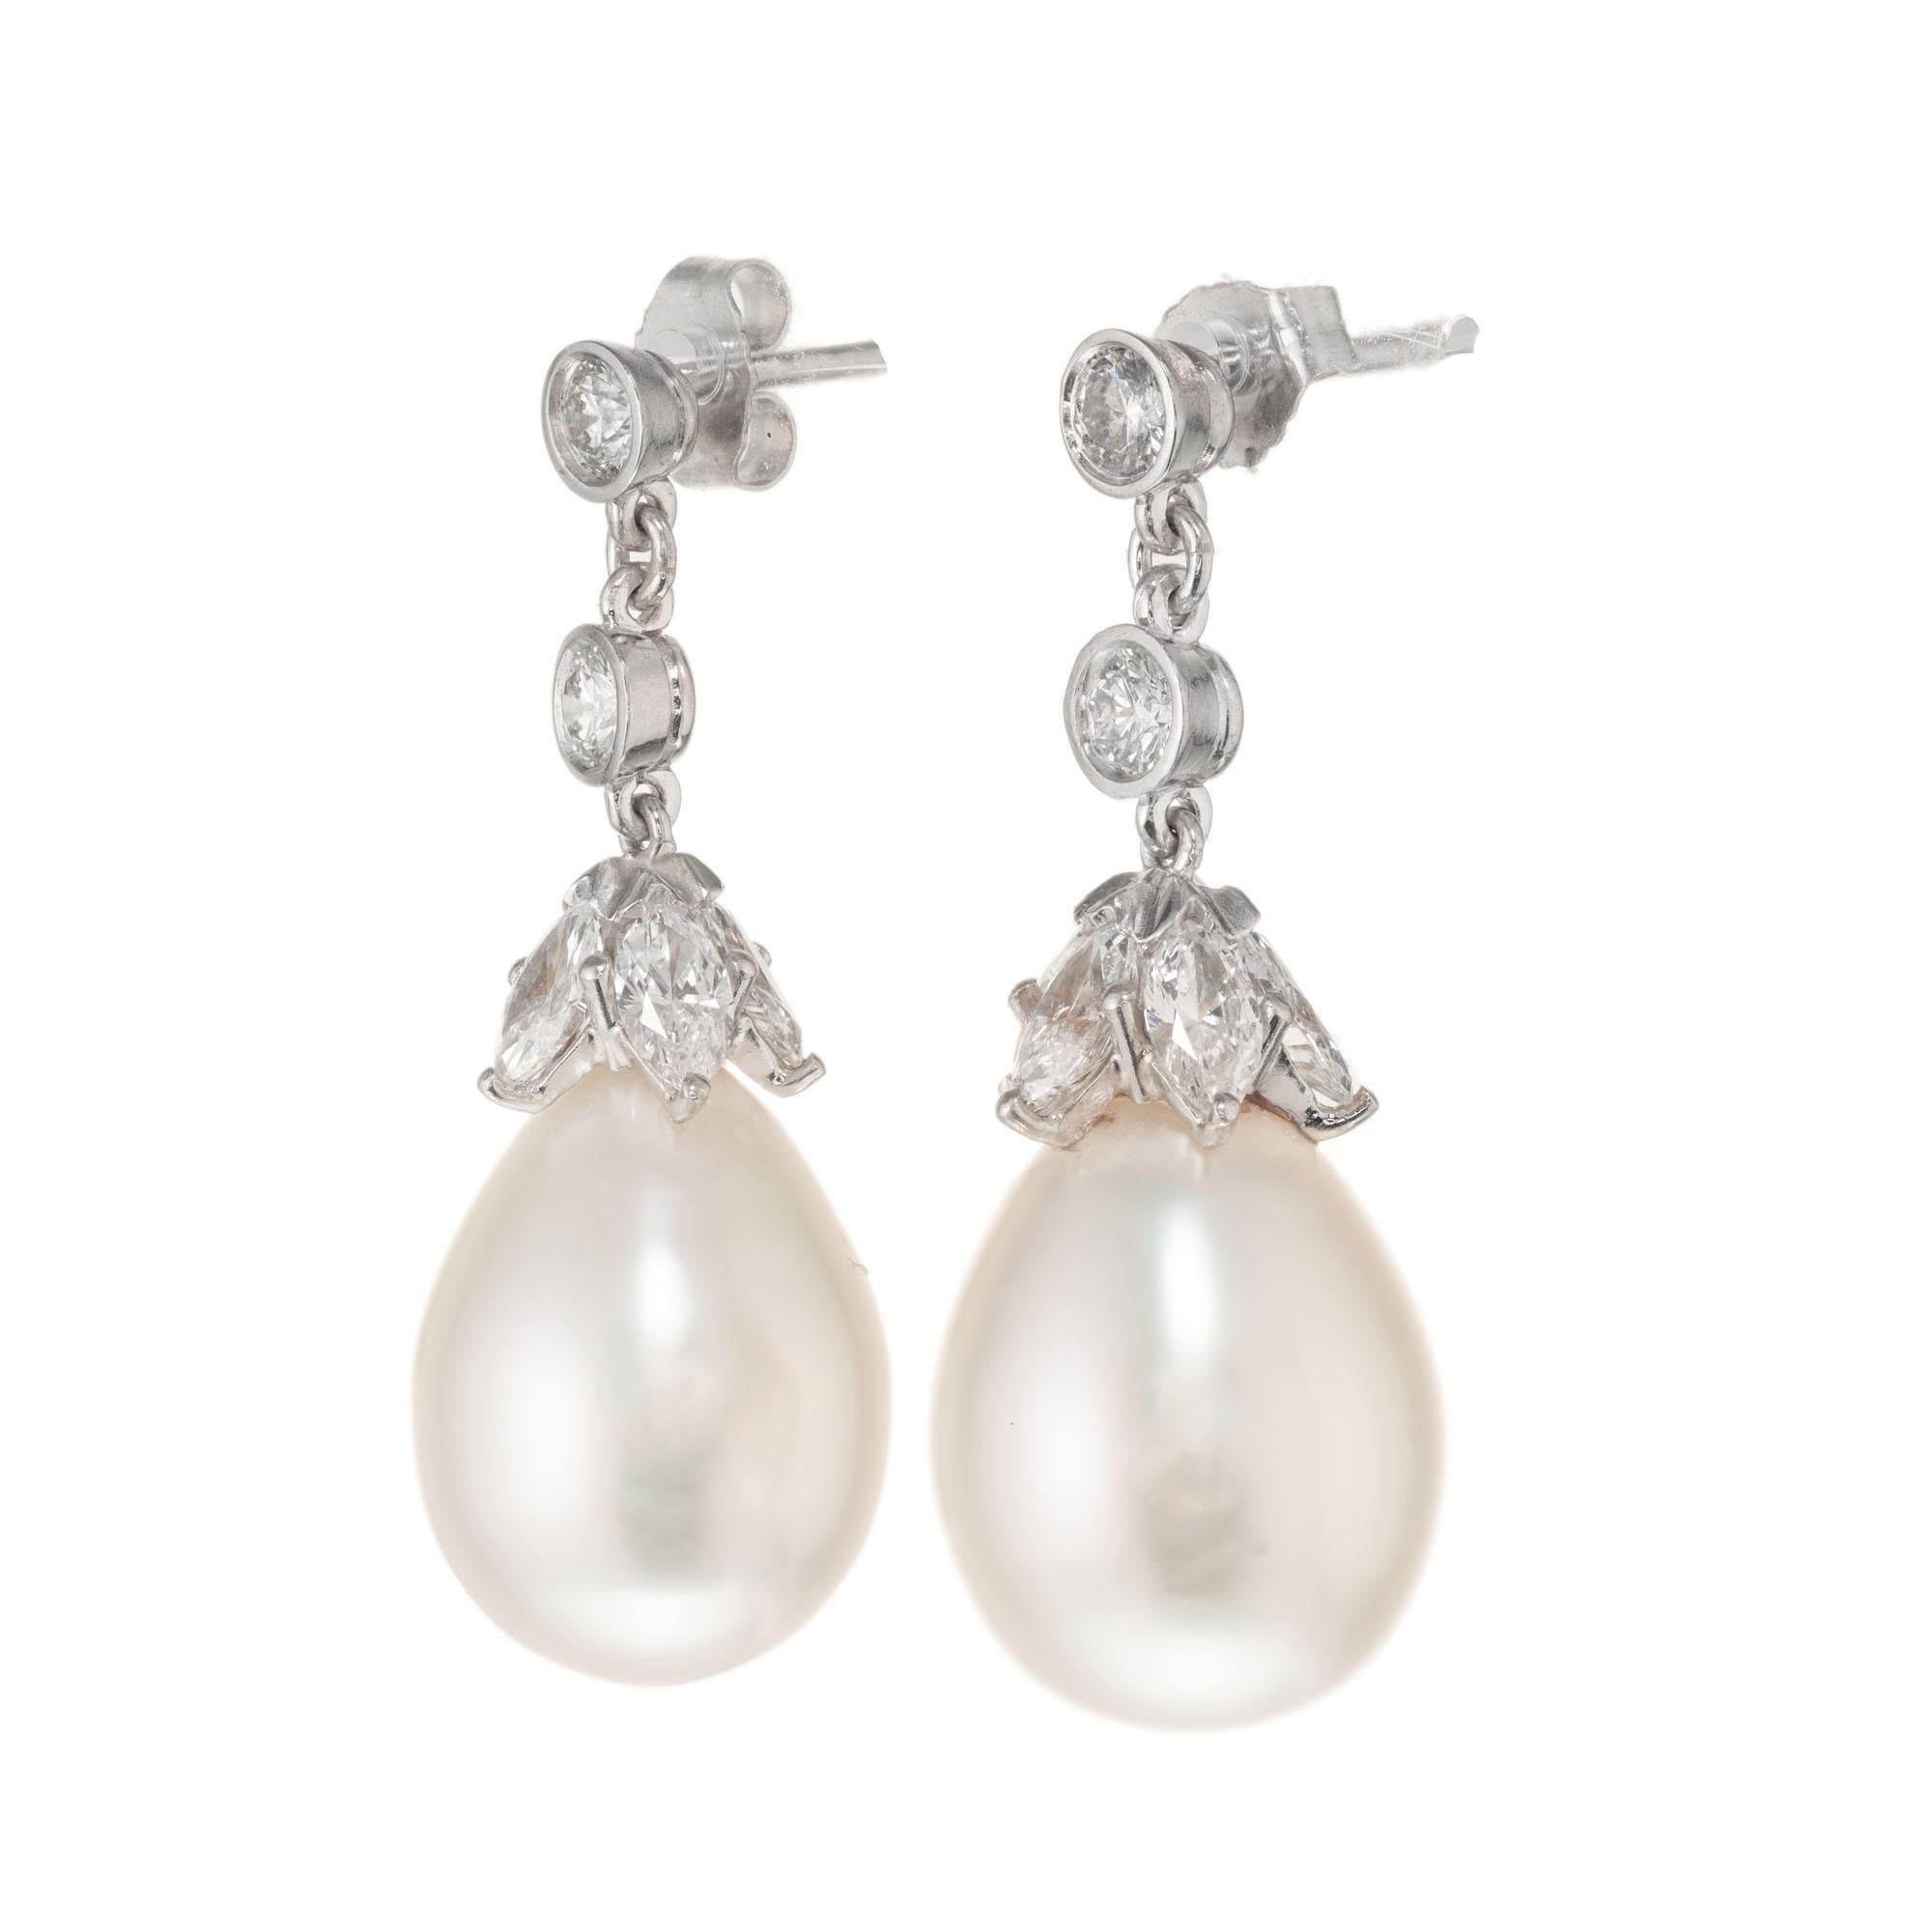 Diamond and Pearl dangle earrings. 2 tear drop South Sea Cultured pearl dangles with 4 round brilliant cut bezel set and 10 marquise cut diamonds set in platinum.

4 round brilliant cut Diamonds, approx. total weight .56cts, I, VS – SI, 3,3mm
10